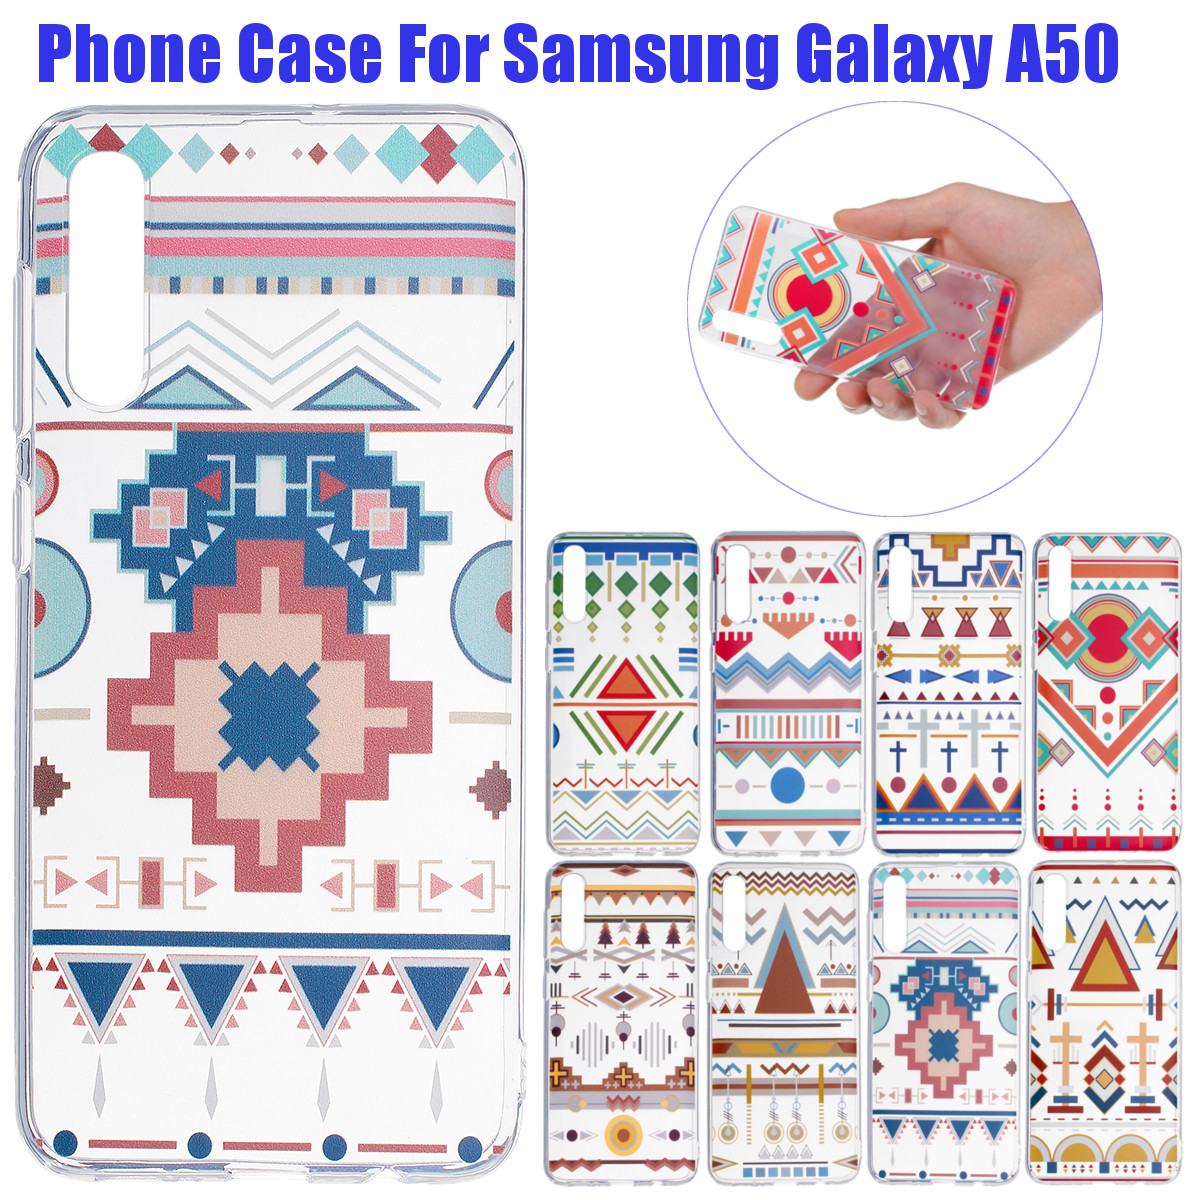 Bakeey-Translucent-Soft-TPU-Shockproof-Protective-Case-Cover-for-Samsung-Galaxy-A50-2019-1634636-1